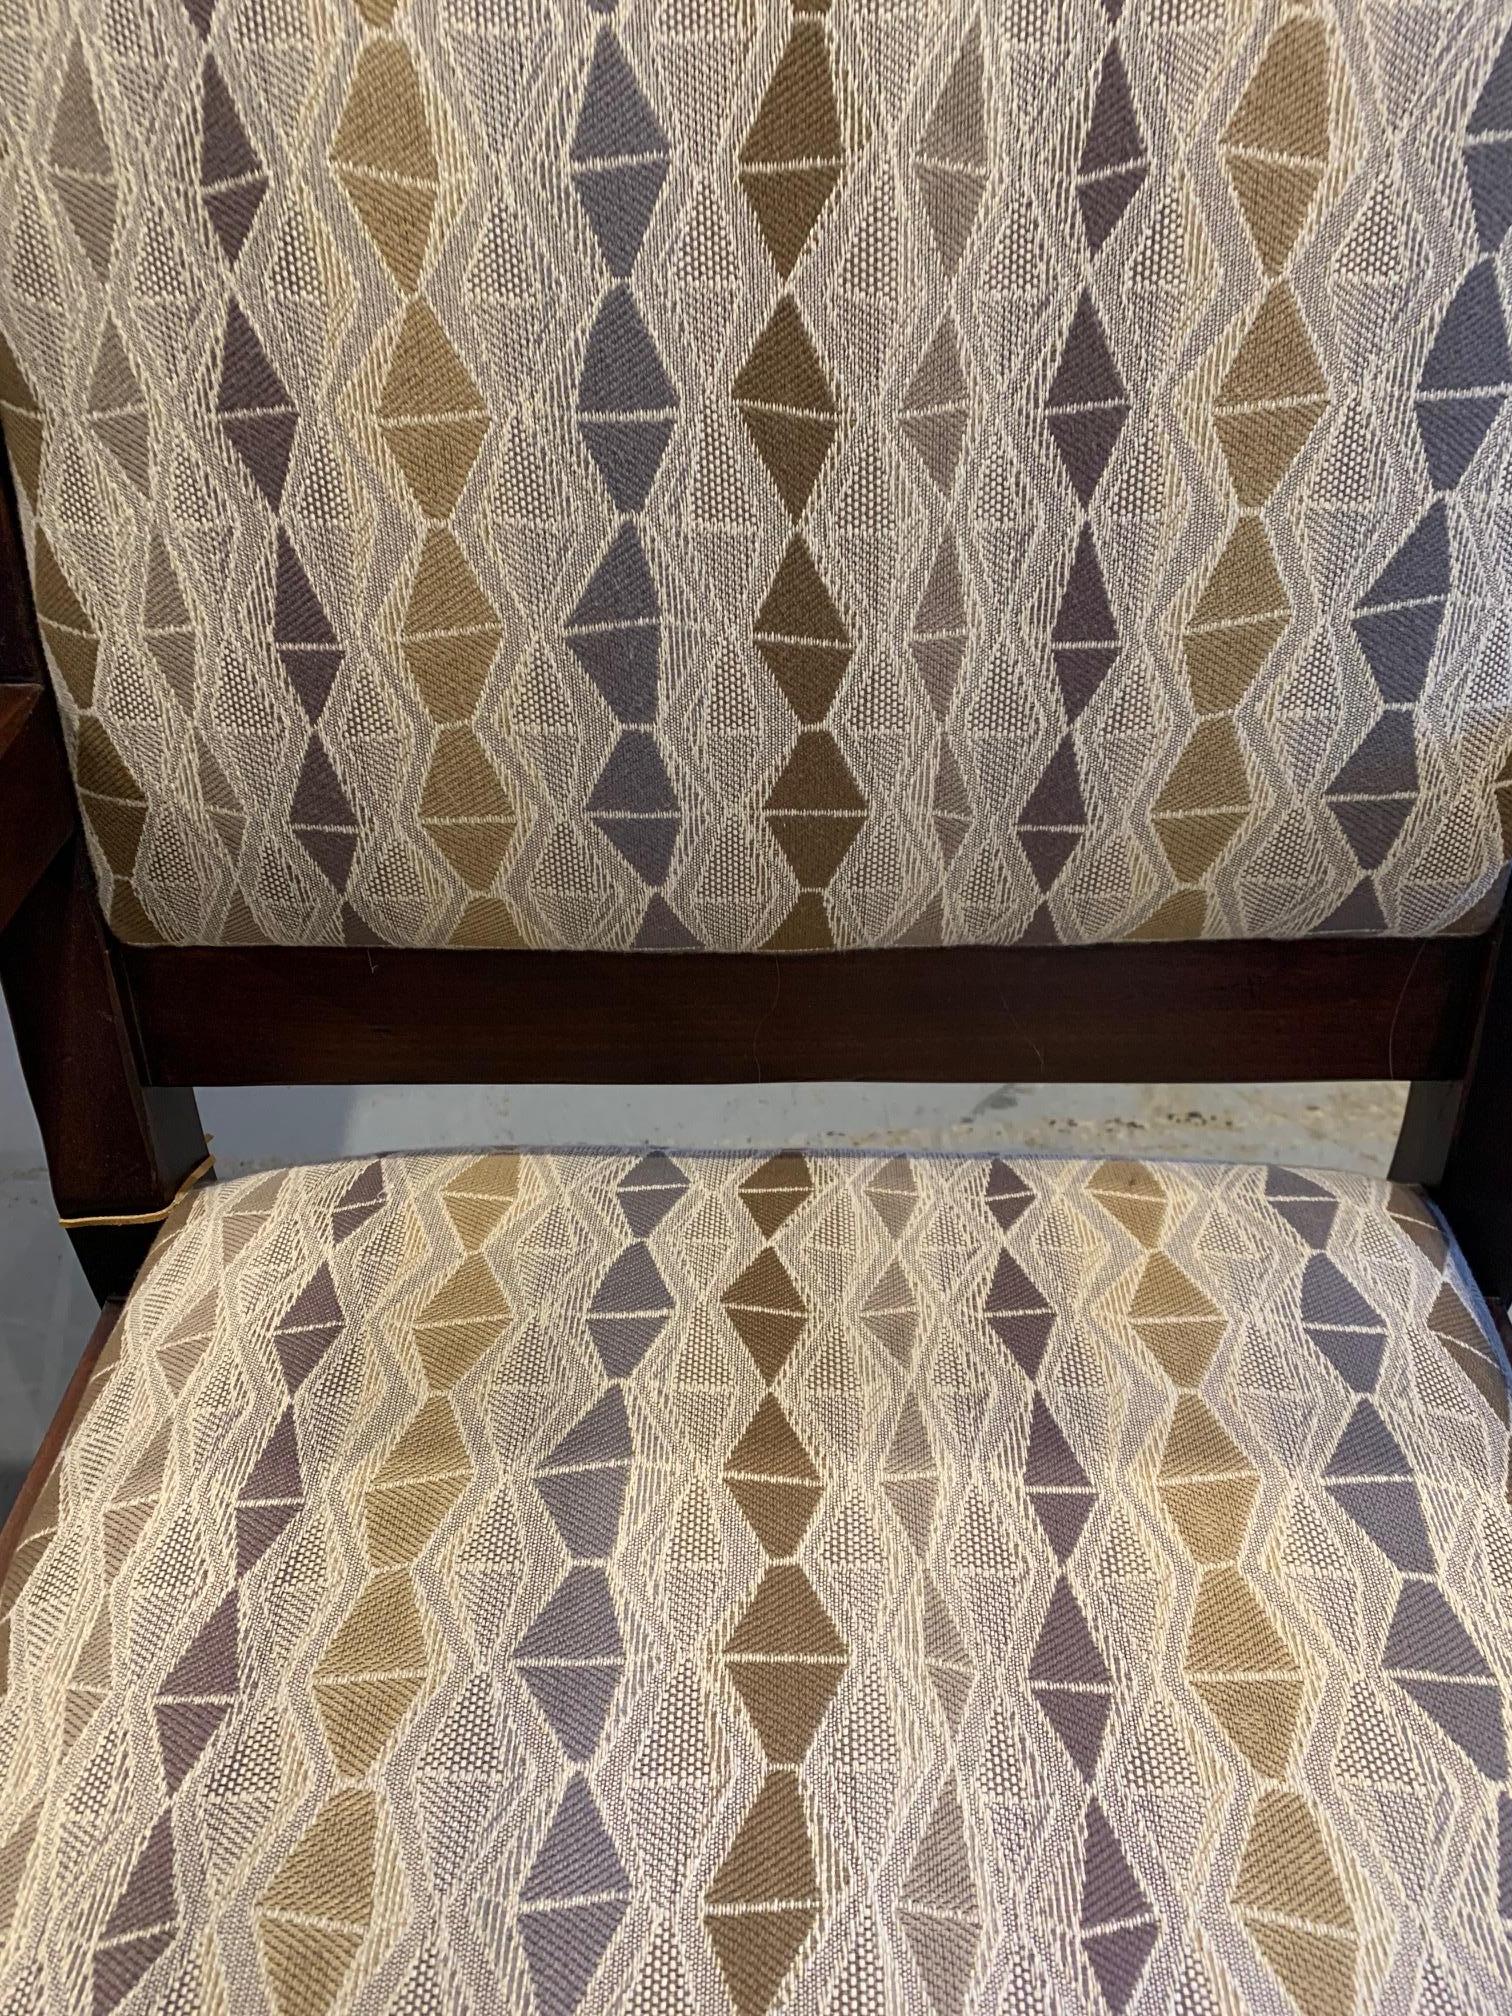 Reception Arm Chair In Excellent Condition For Sale In Albuquerque, NM